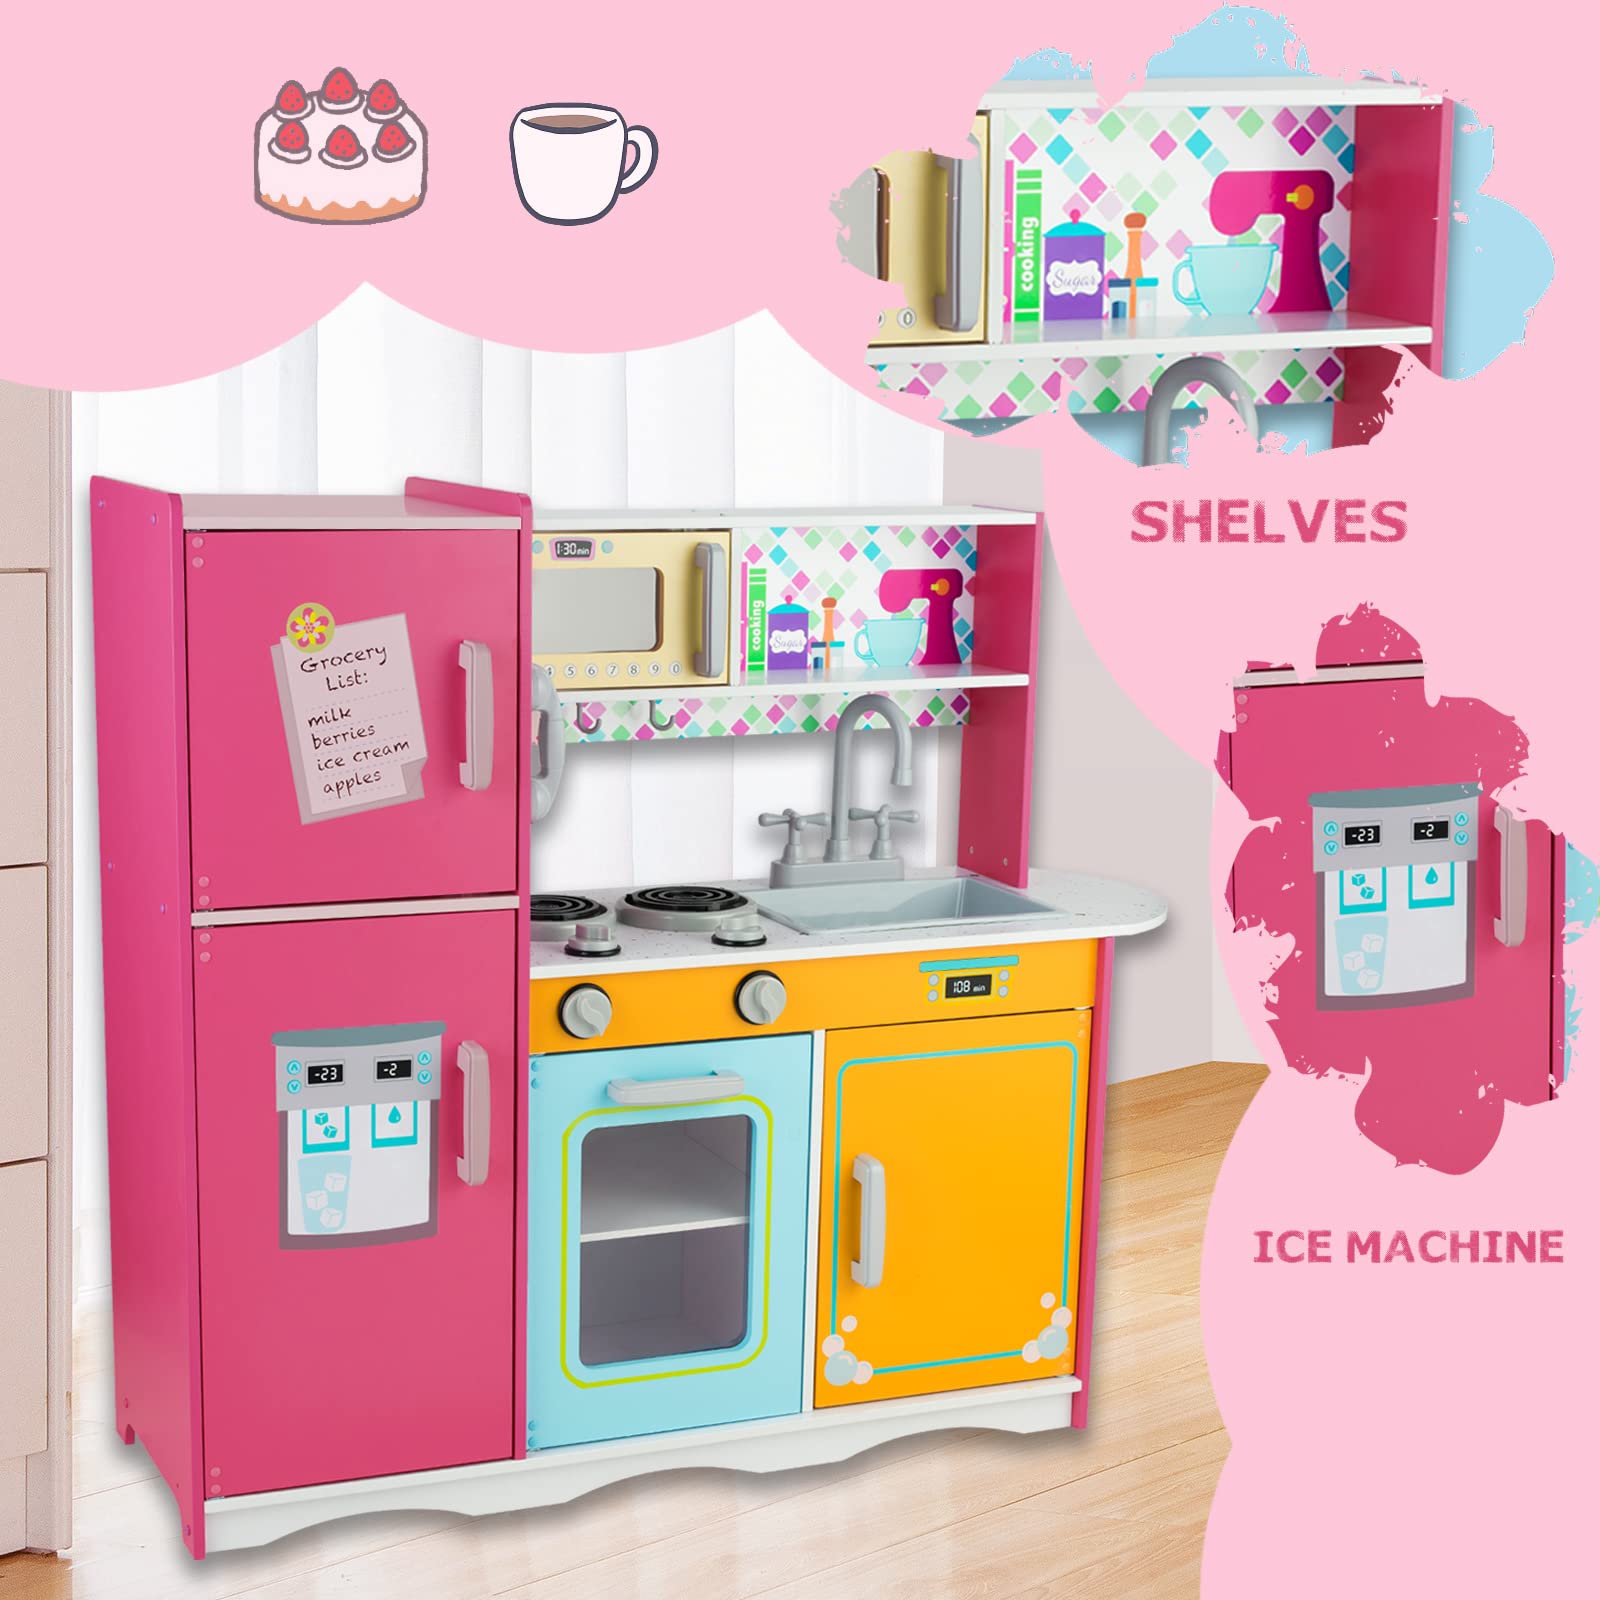 WoodenEdu Kitchen Playset for Kids Ages 3-8, Wooden Pretend Play Kitchen, Including Telephone, Ice Maker, Refrigerator, Dimensions: 35” H x 31” W x 12” D (Colorful)